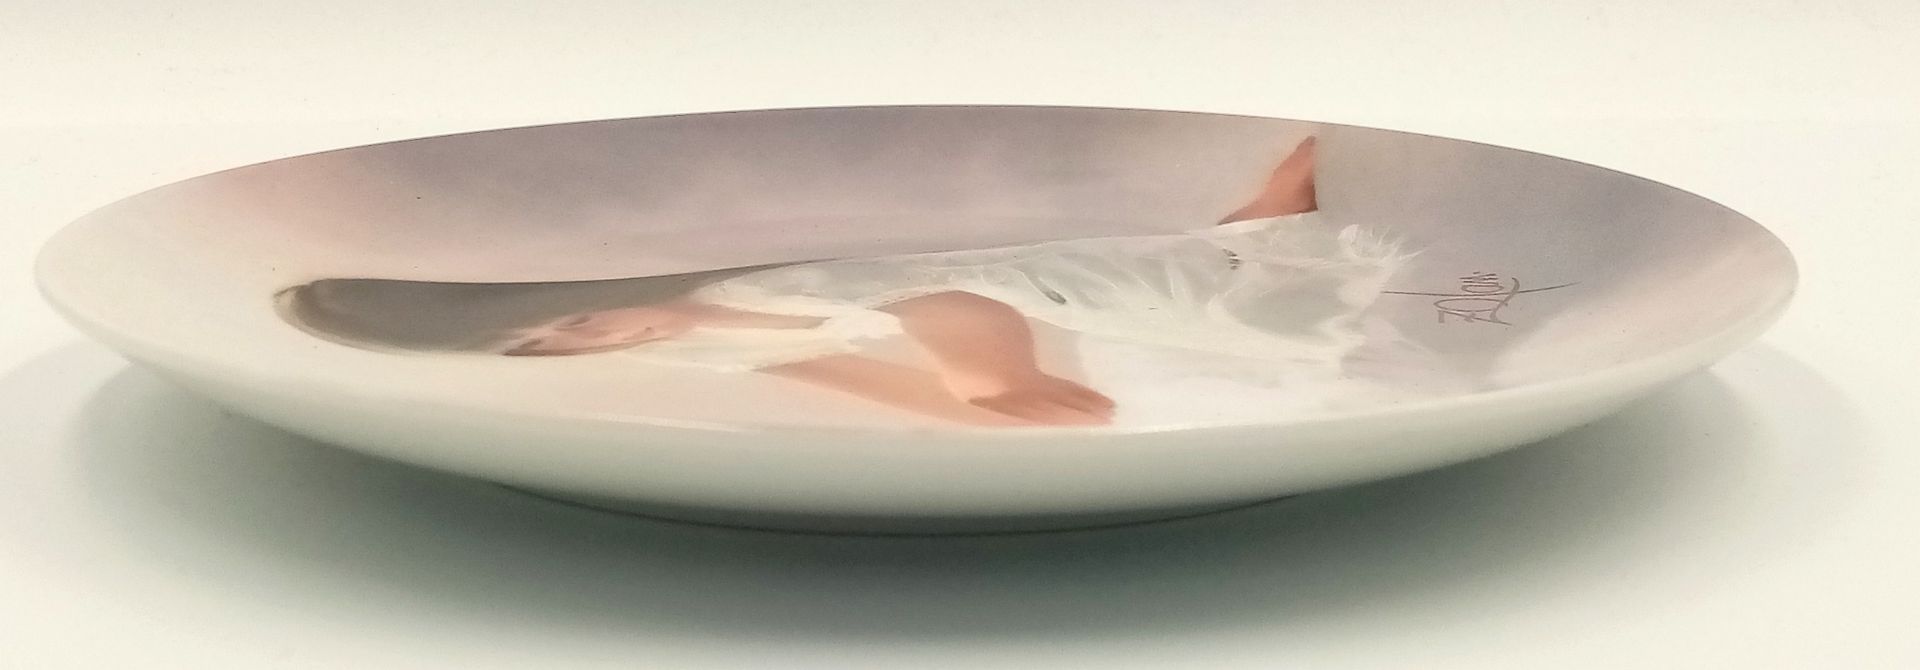 A Donald Zolan Tender Beginnings Limited Edition Ceramic Plate. Comes with COA and original - Image 4 of 5